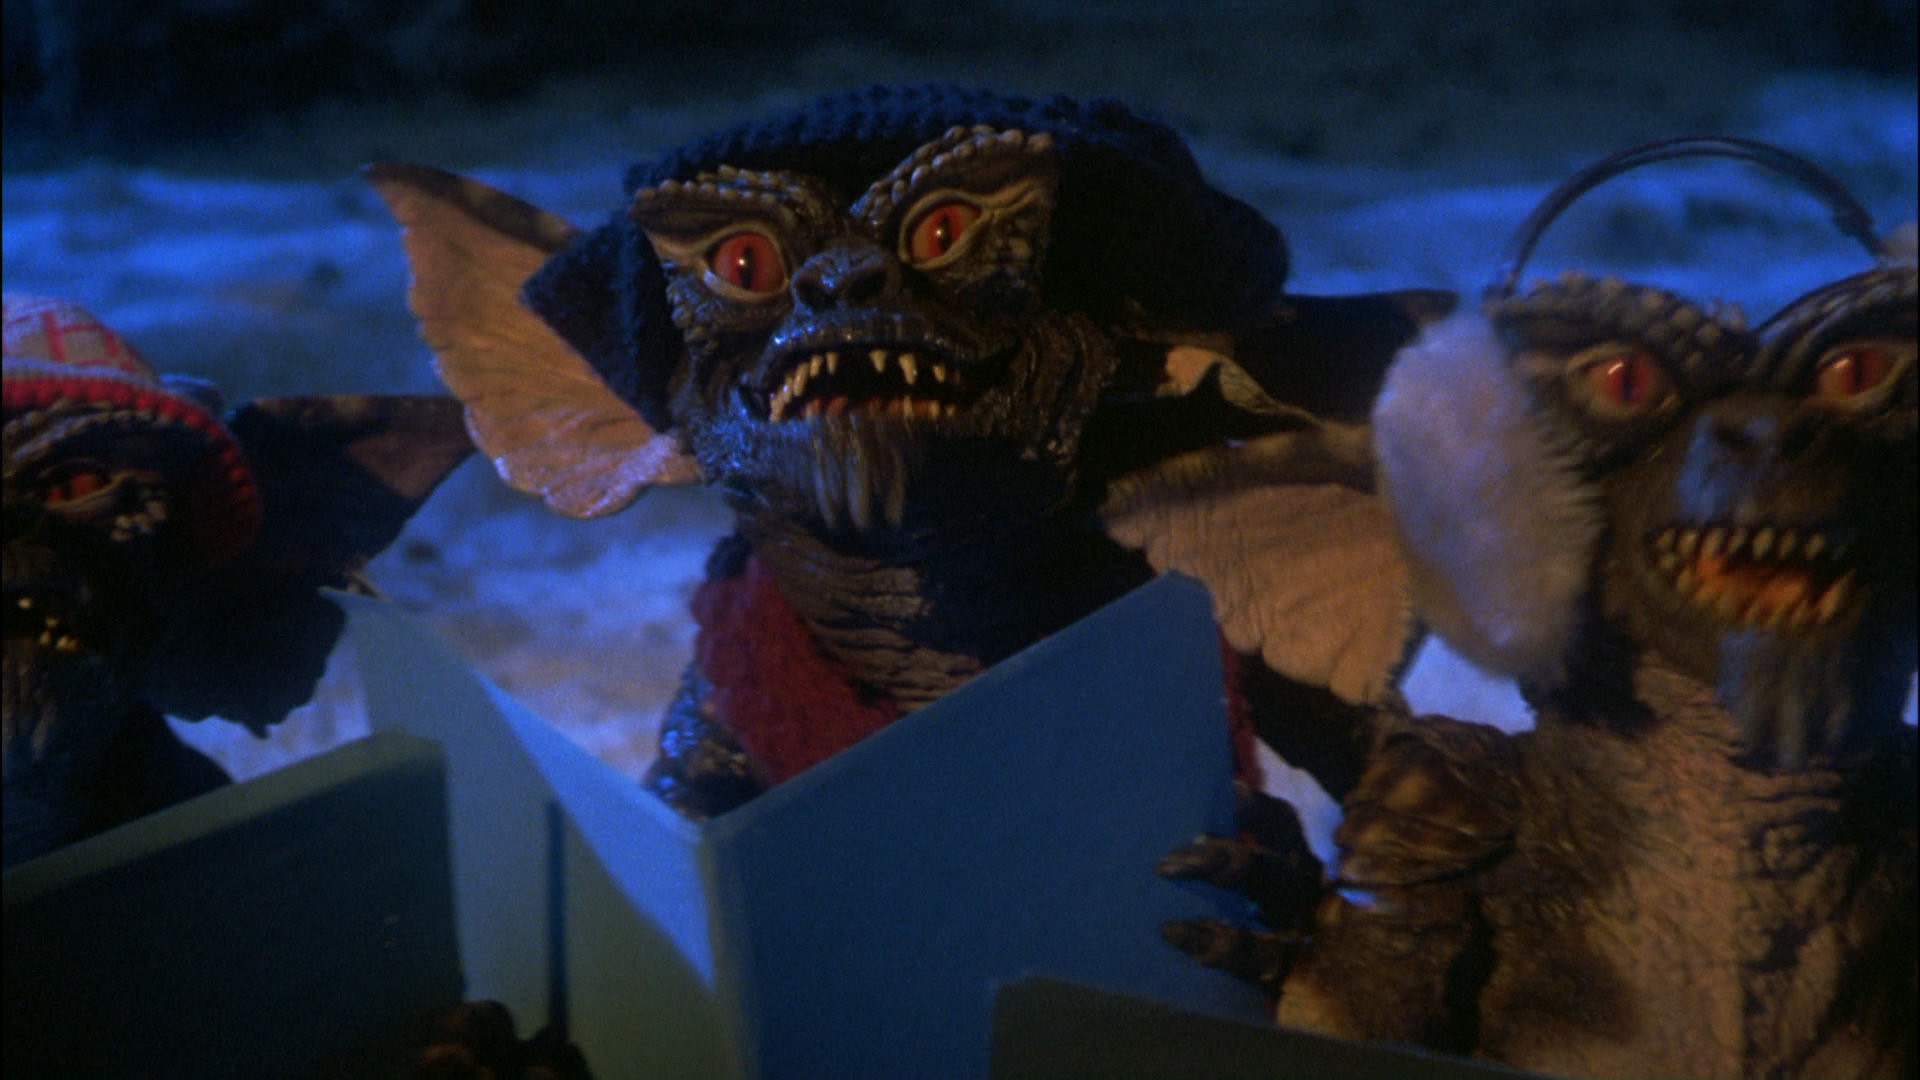 1920x1080 View full size A reboot of the 1984 cult horror classic "Gremlins" is  reportedly in the works. Warner Bros. Photo | AMBLIN ENTERTAINMENT